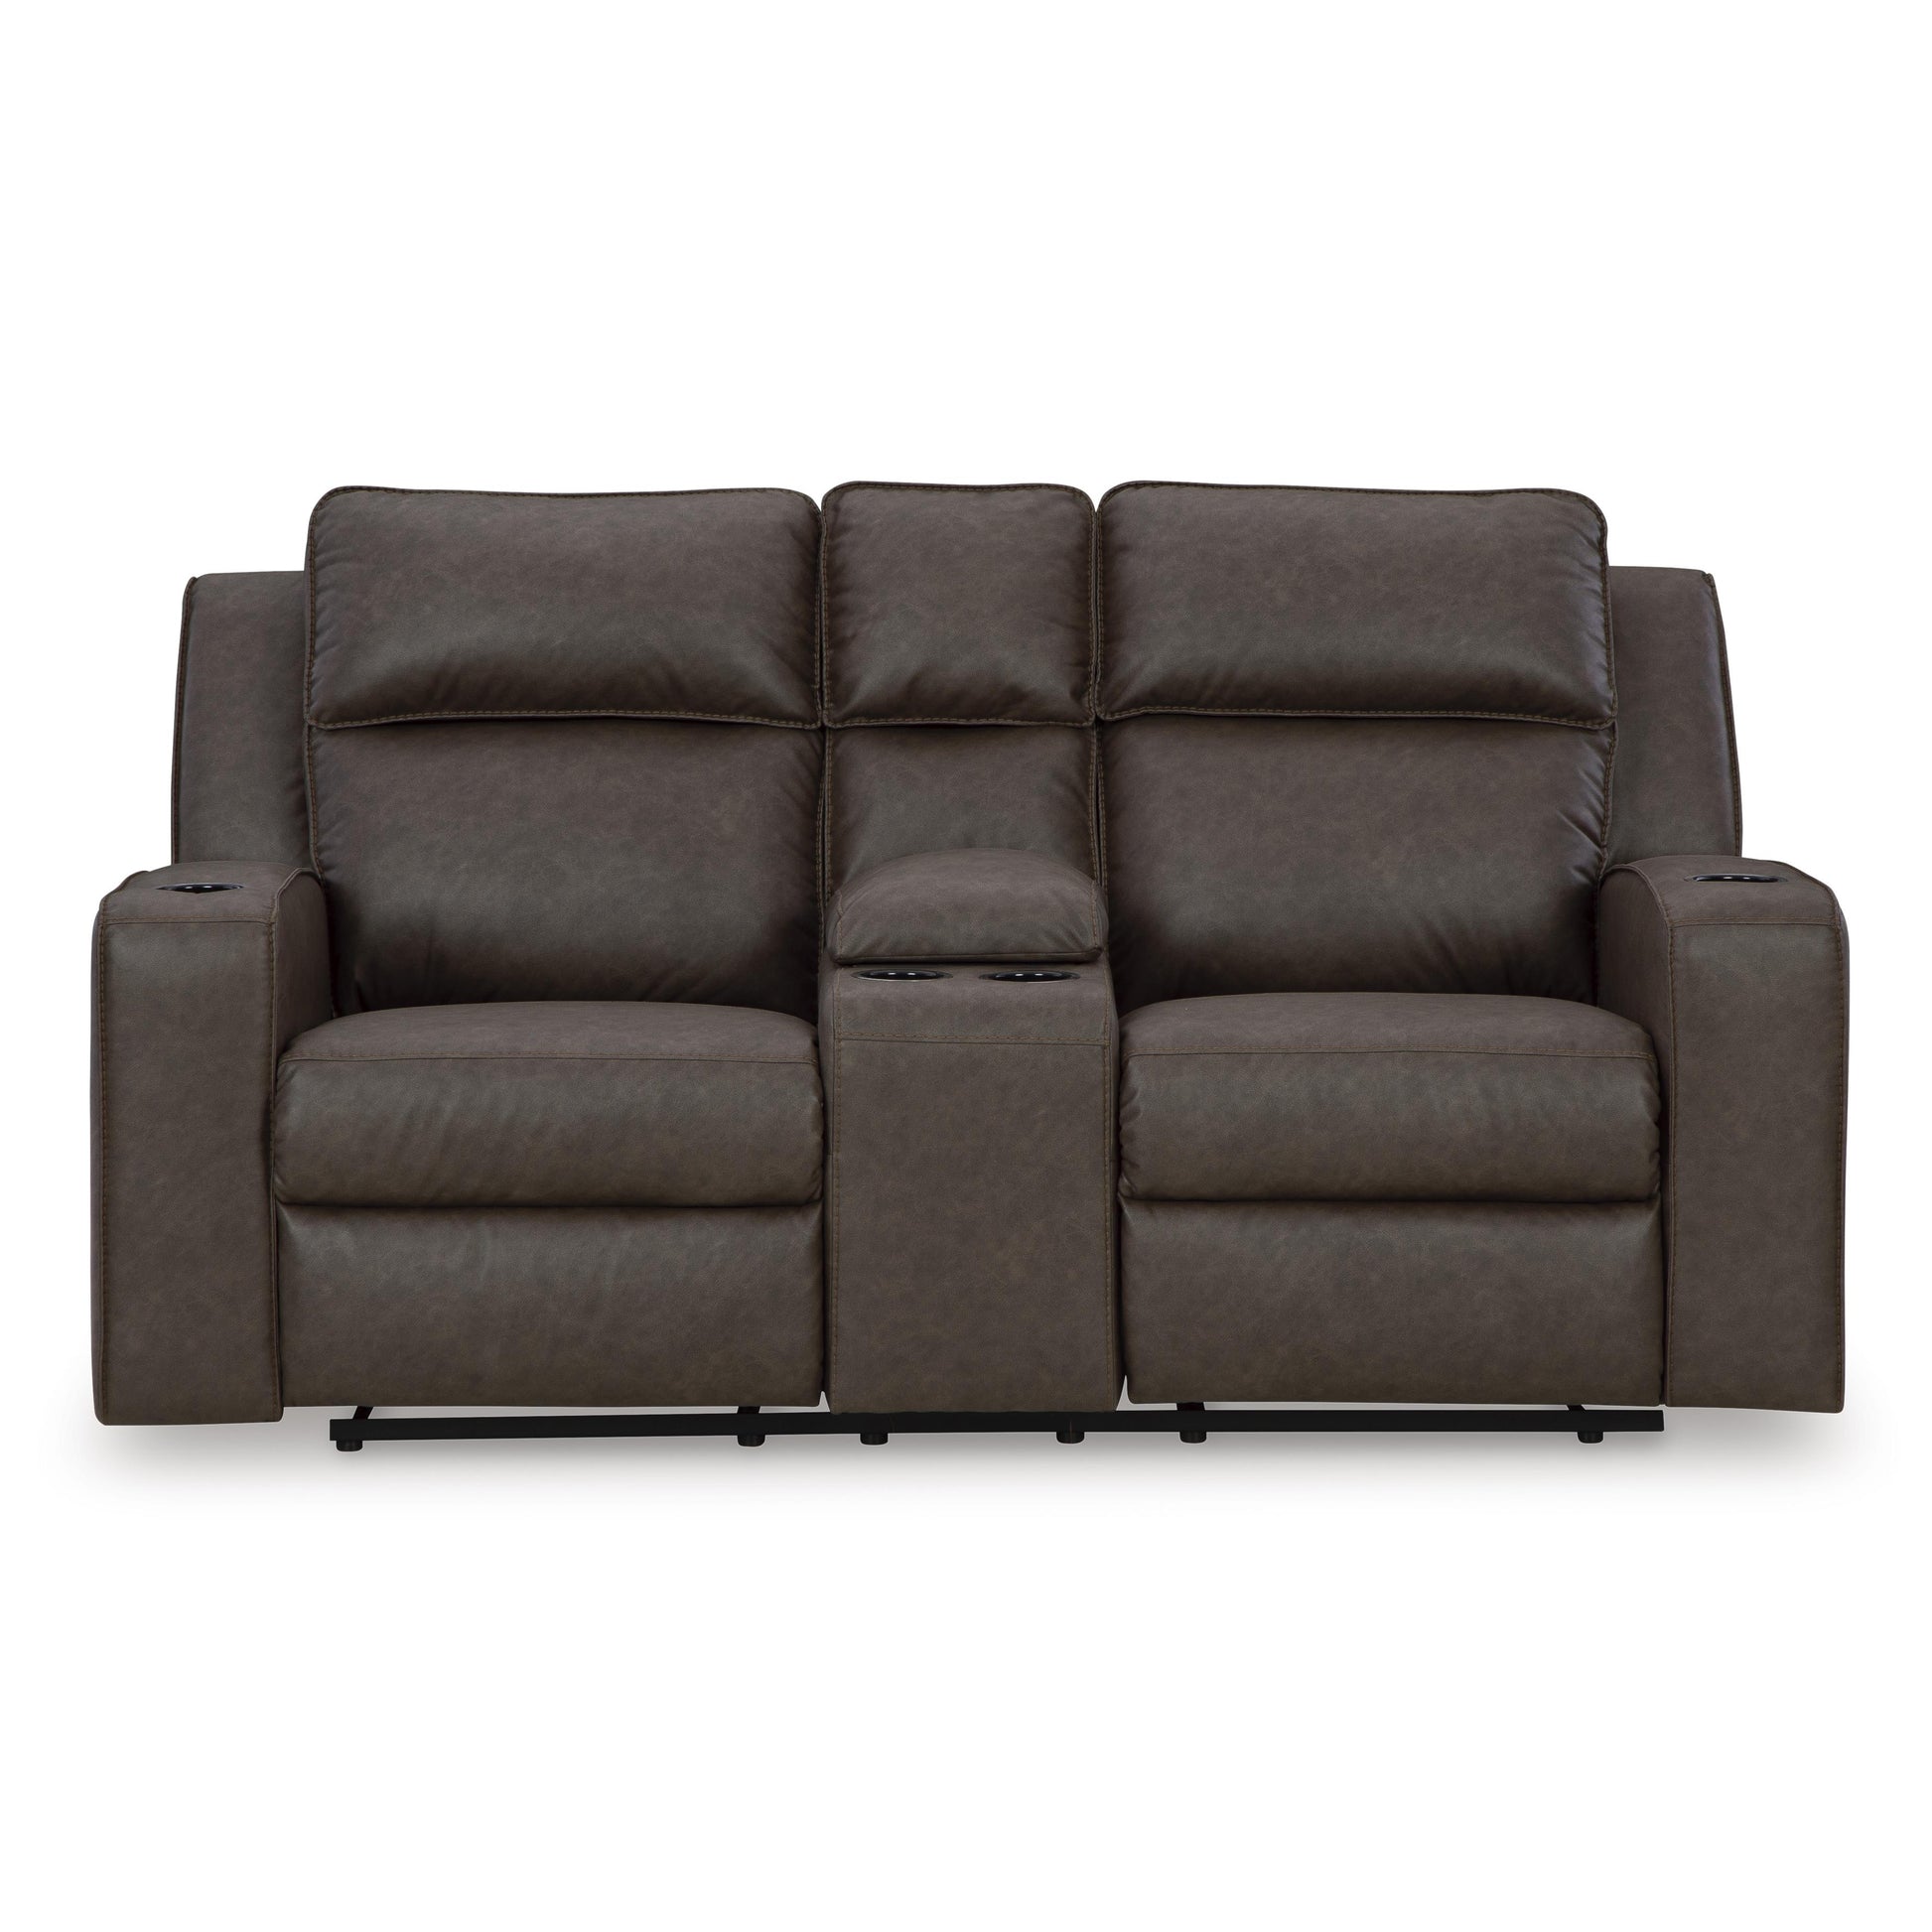 Signature Design by Ashley Lavenhorne Reclining Leather Look Loveseat 6330694 IMAGE 3